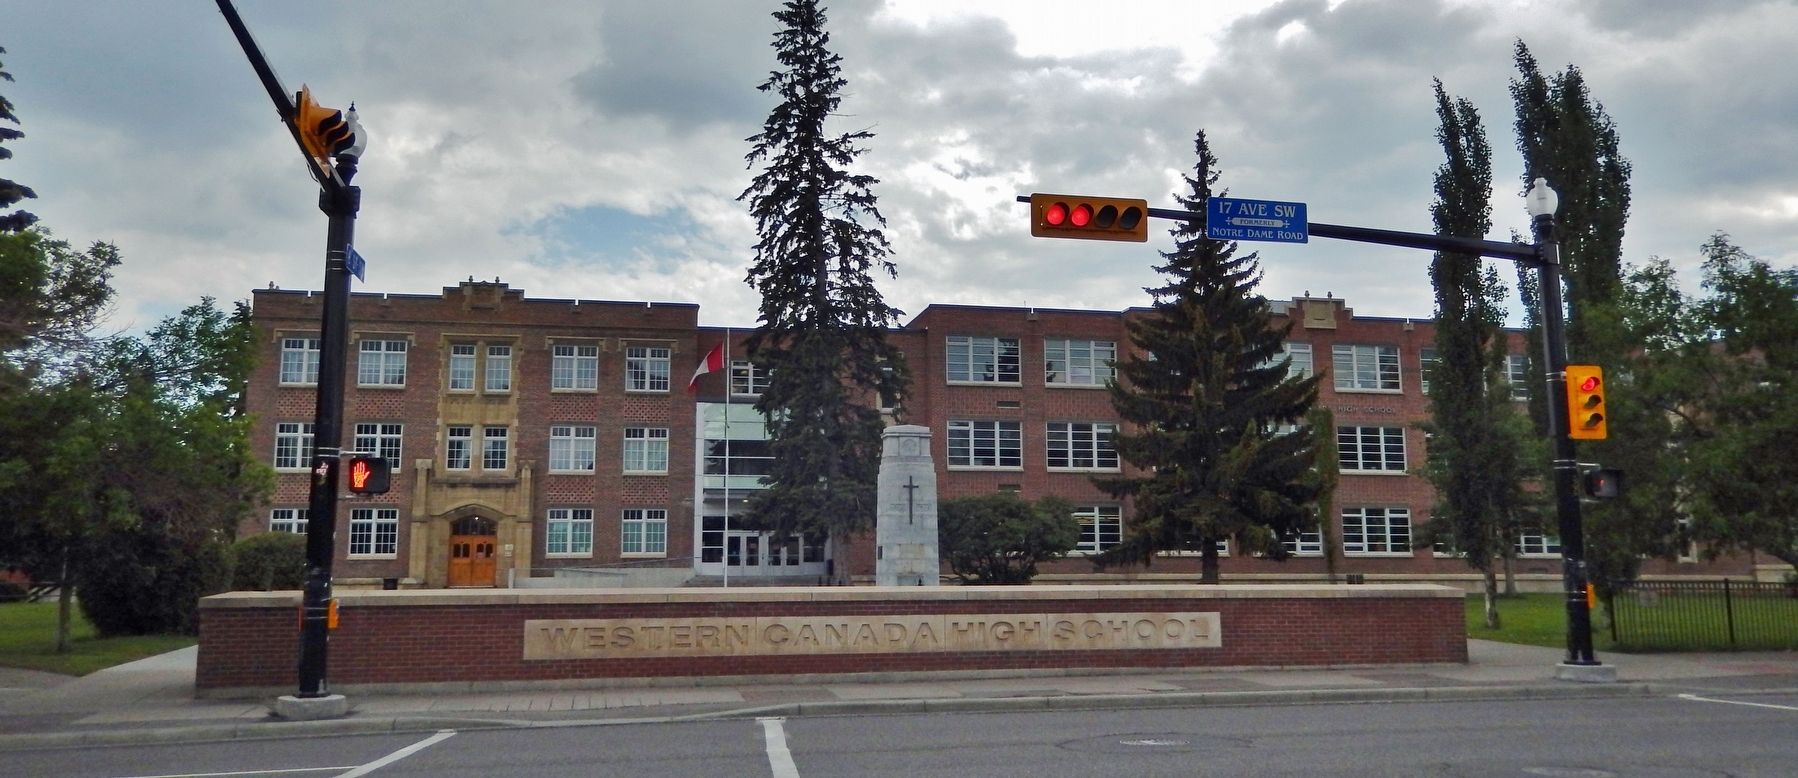 Western Canada High School (<i>north elevation</i>) image. Click for full size.